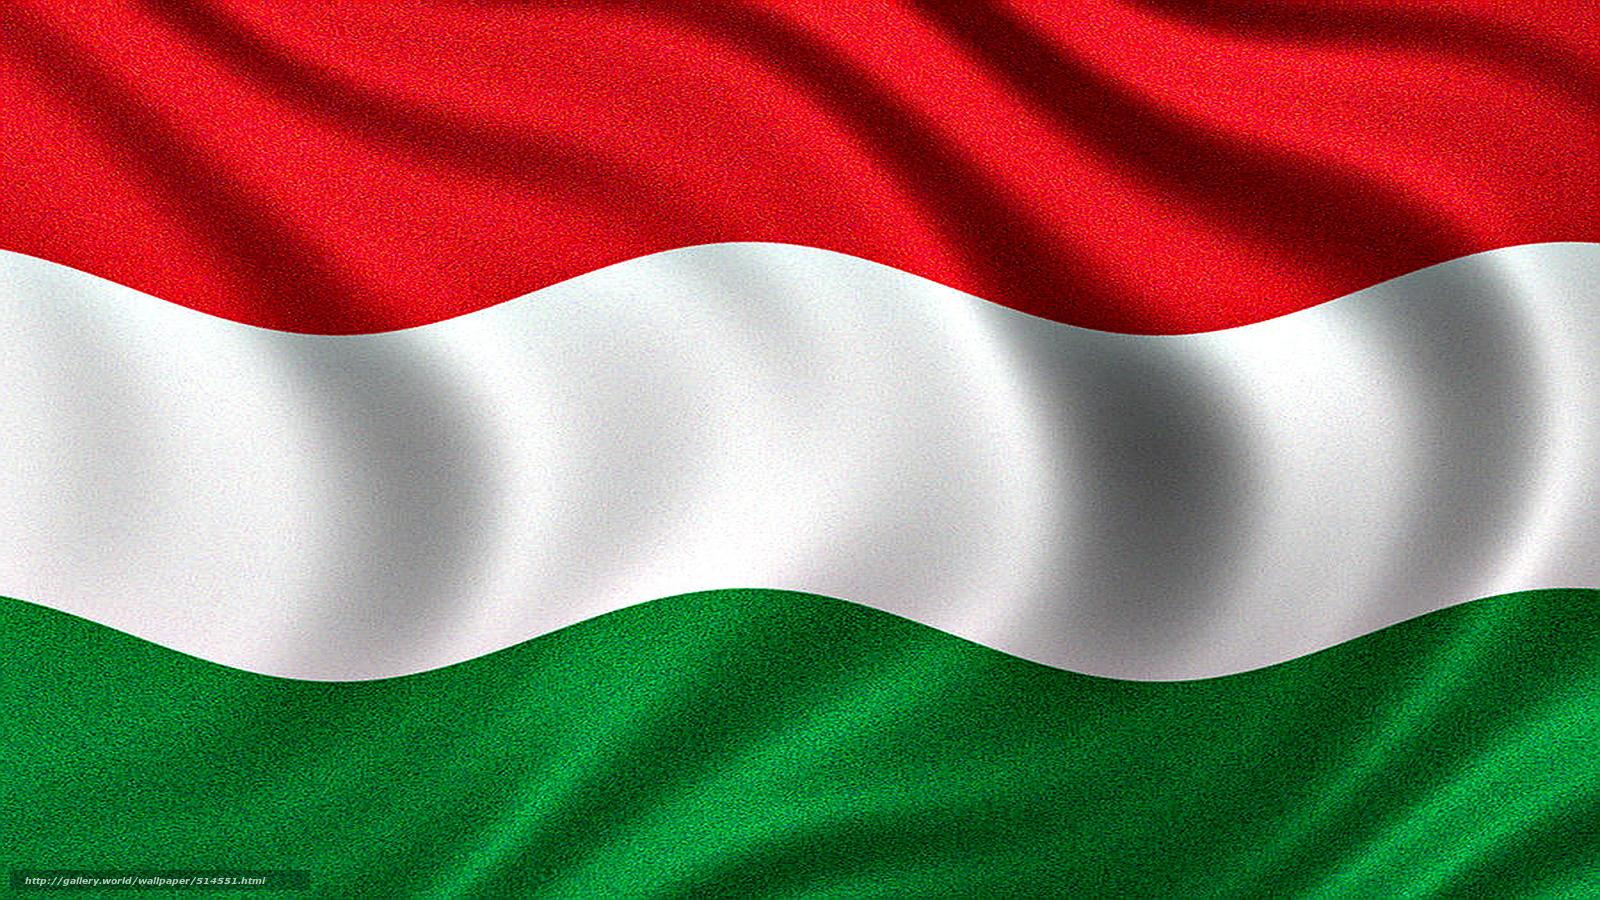 Download wallpaper Flag of Hungary, Hungarian flag, Hungary flag of hungary free desktop wallpaper in the resolution 1920x1080